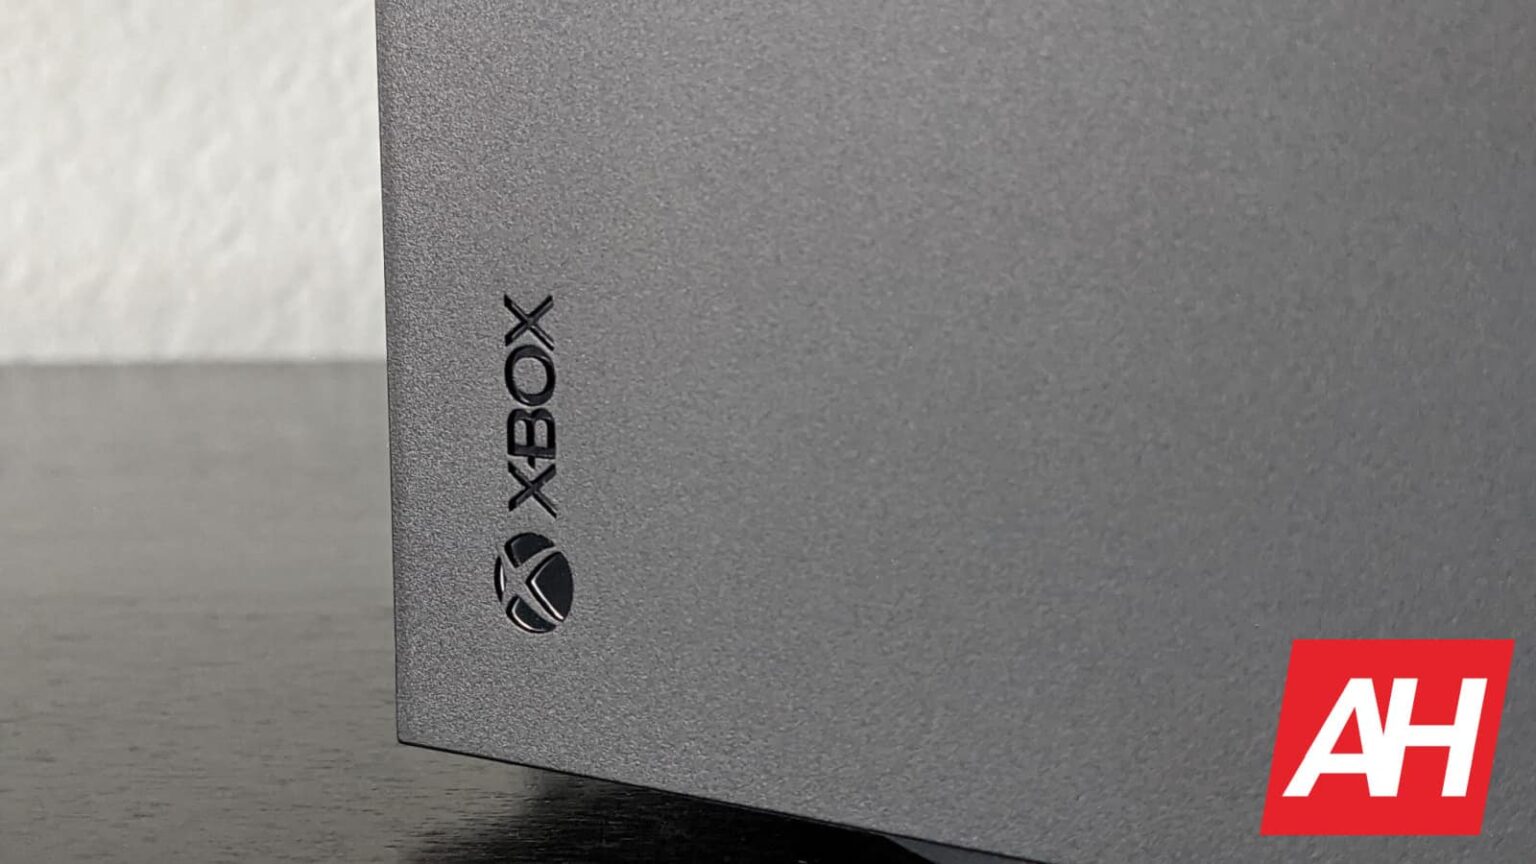 The next Xbox might include compatibility with PC stores